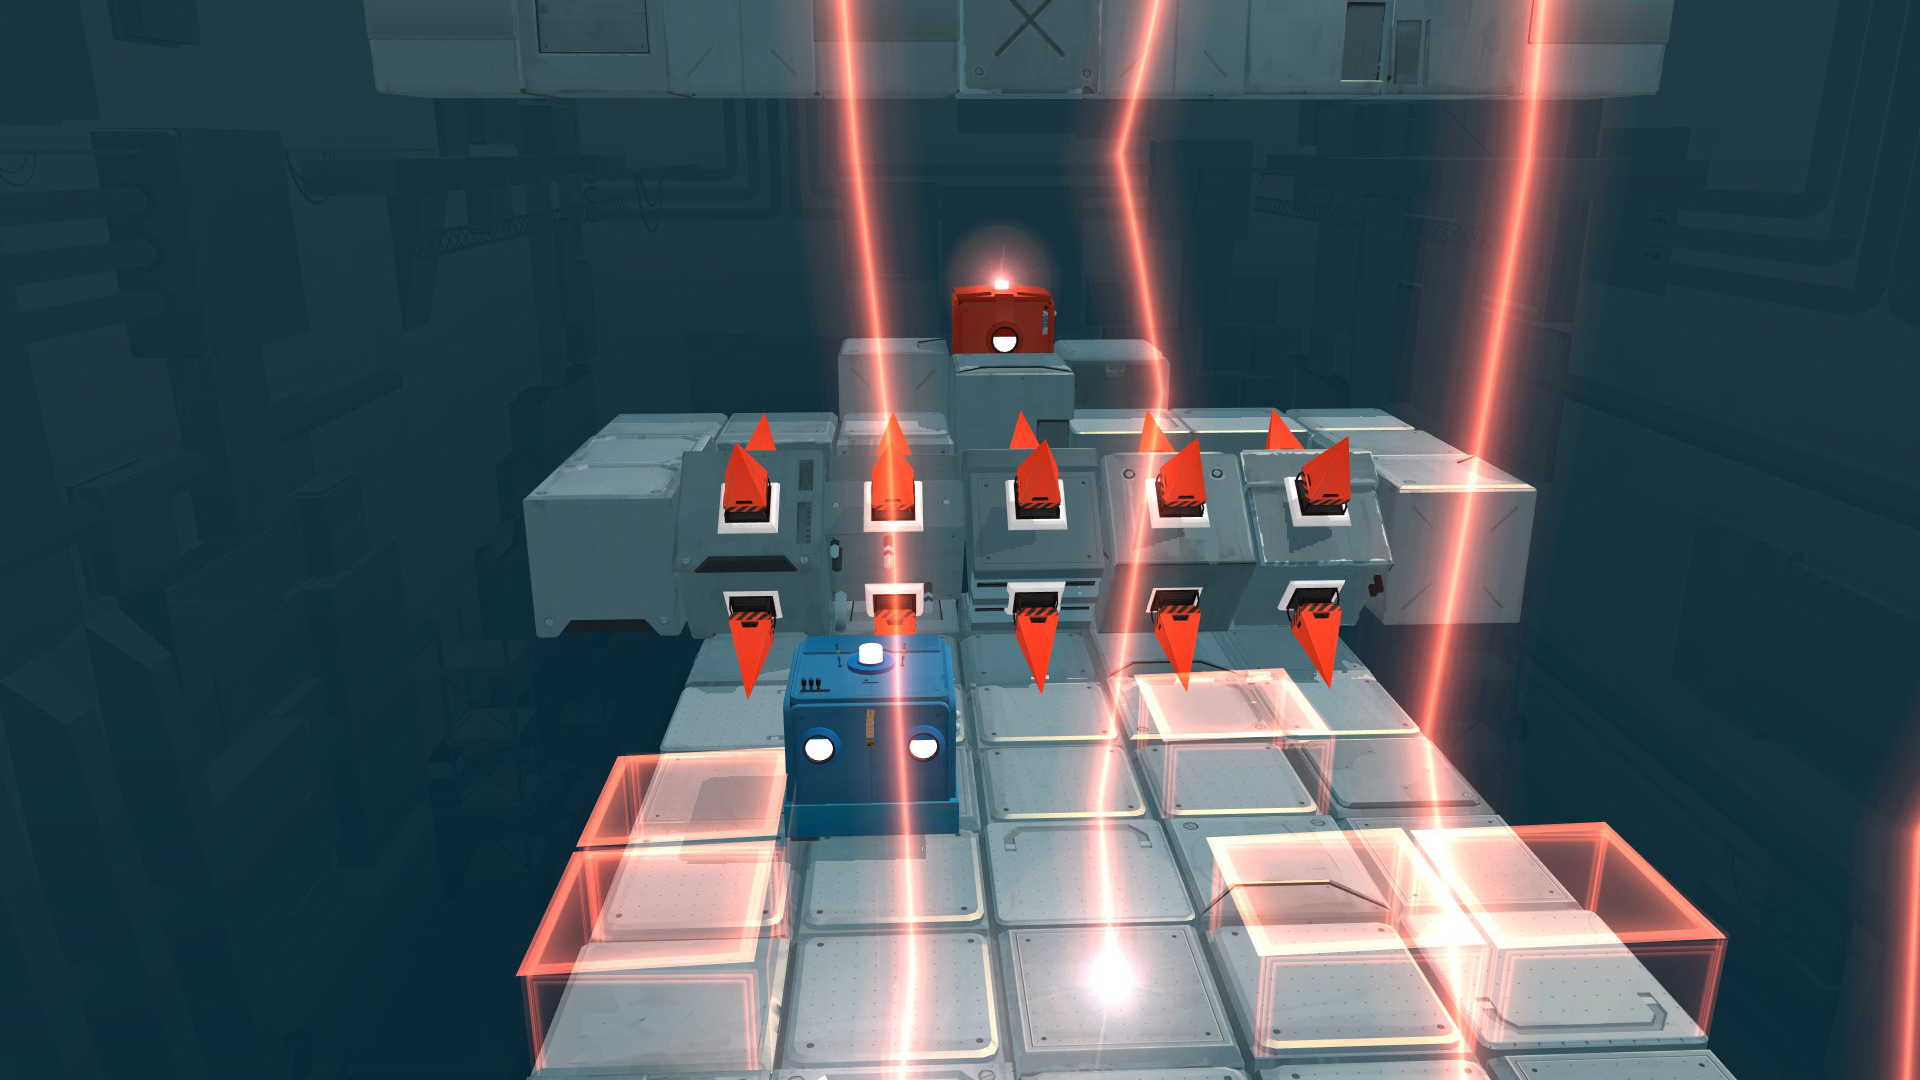 Co Op Puzzle Platformer Rez Plz Coming To Nintendo Switch Next Year Handheld Players